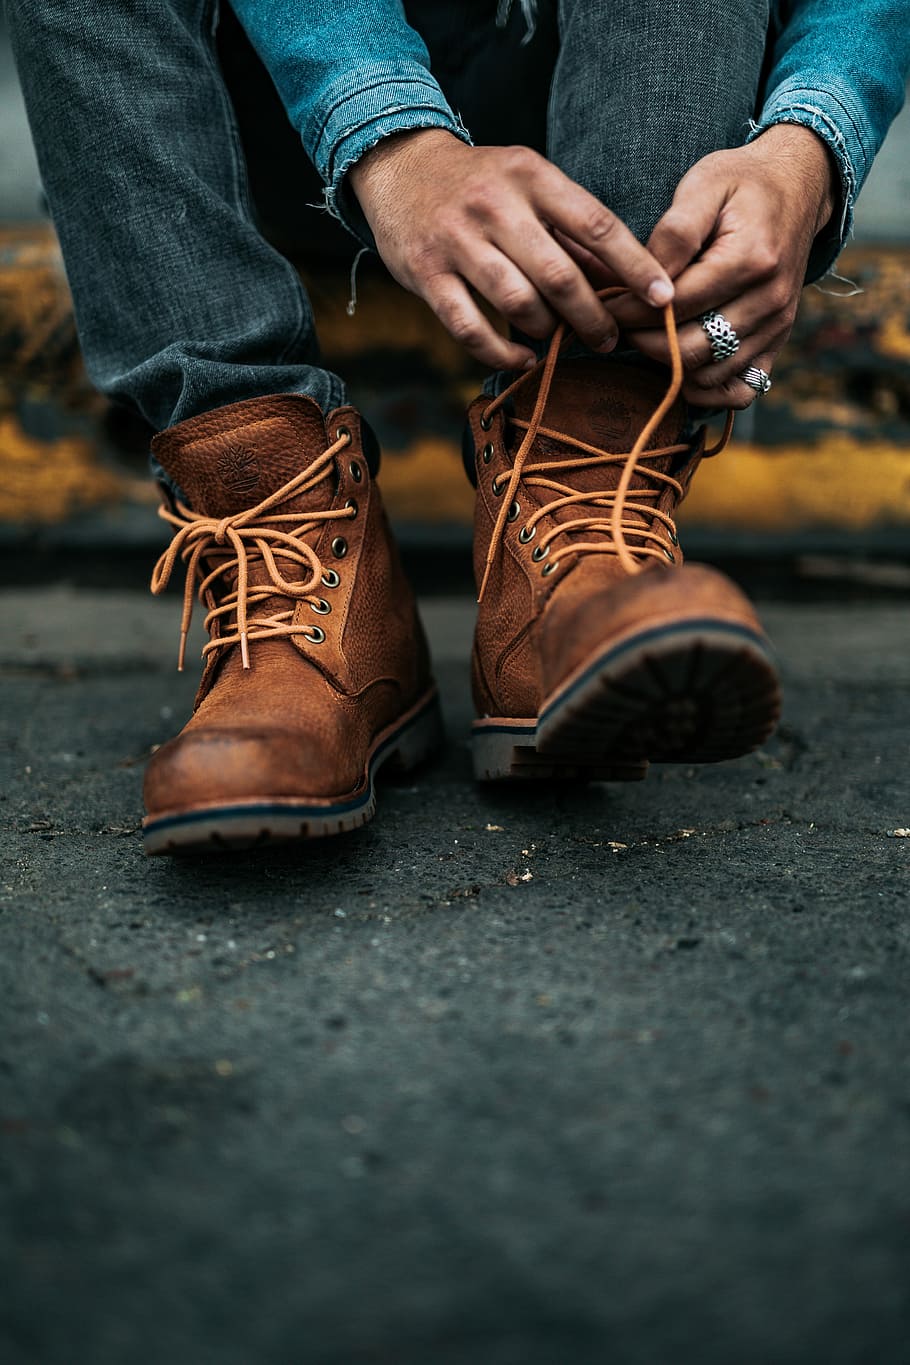 photography of person lacing his/her boots, person holding shoe lace